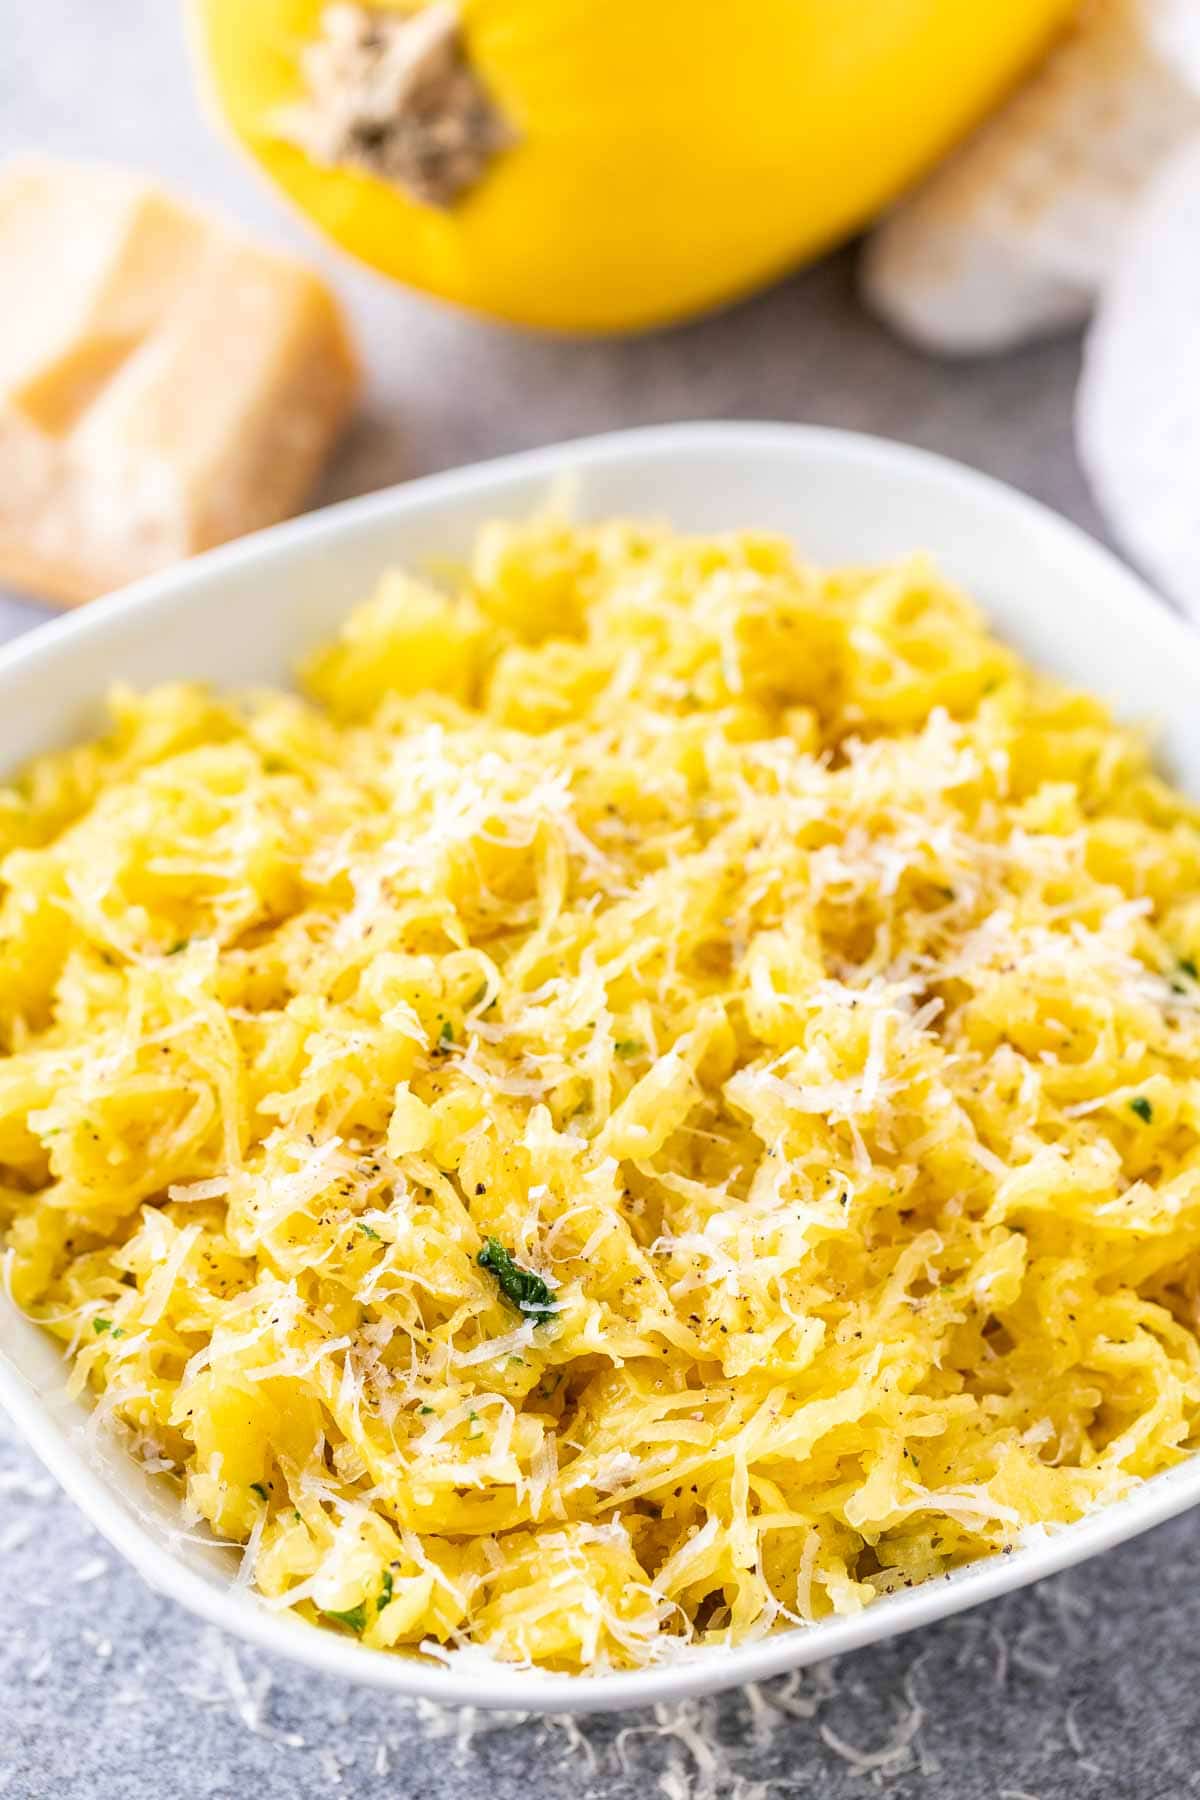 Strands of baked spaghetti squash on a plate